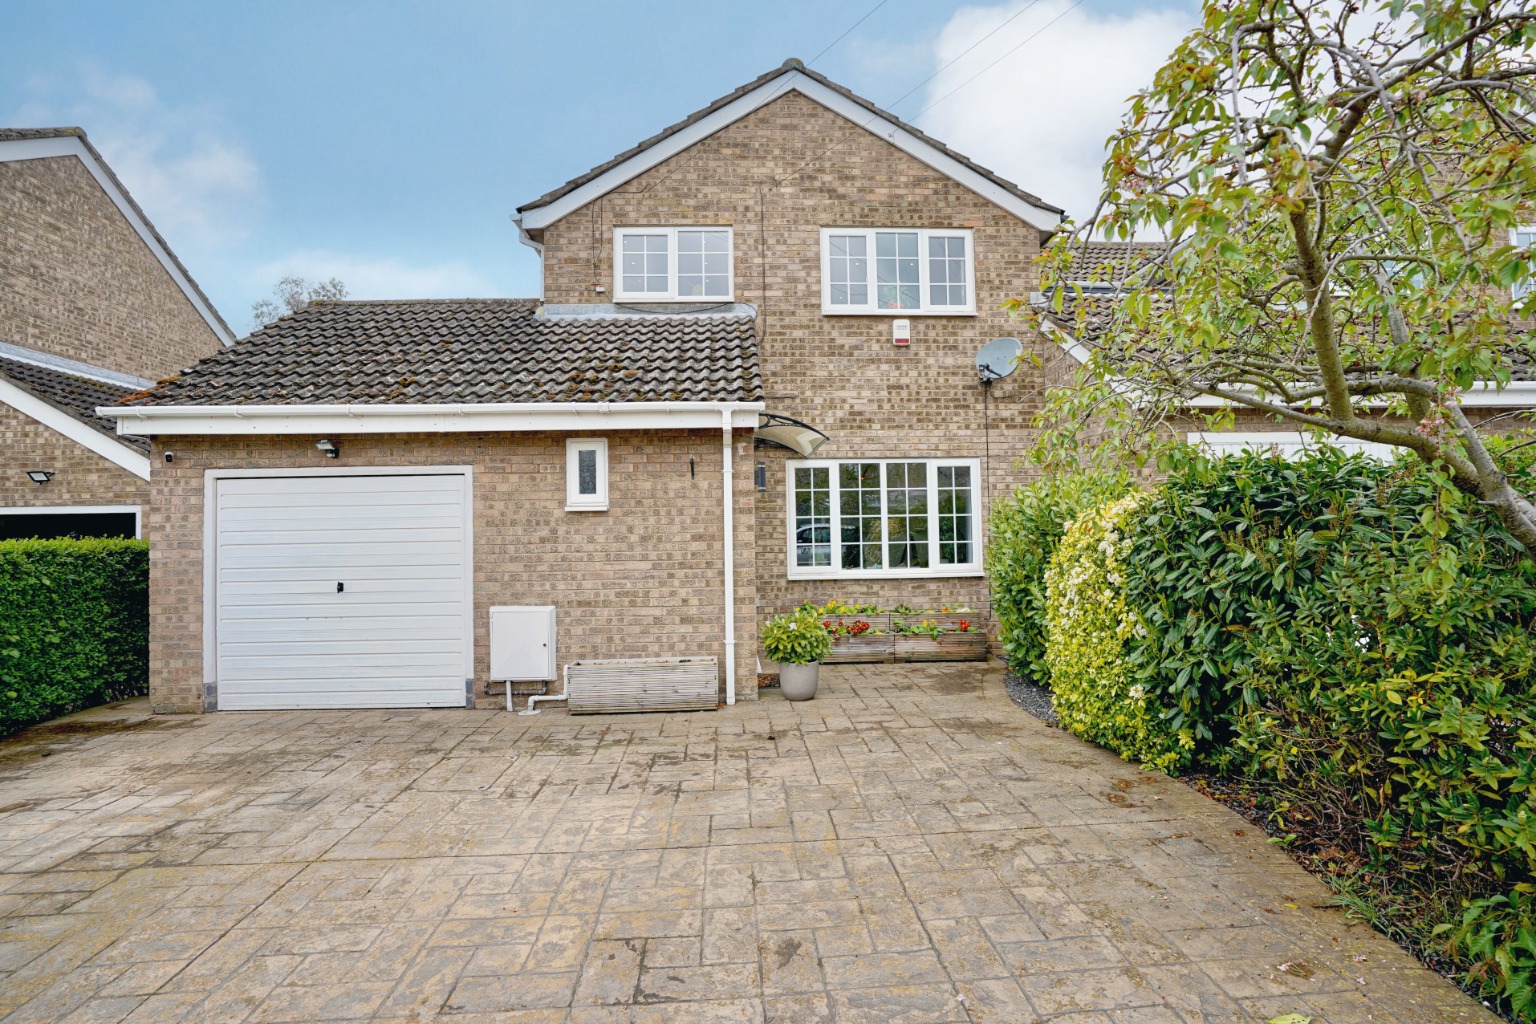 4 bed detached house for sale in Staughton Place, St. Neots - Property Image 1